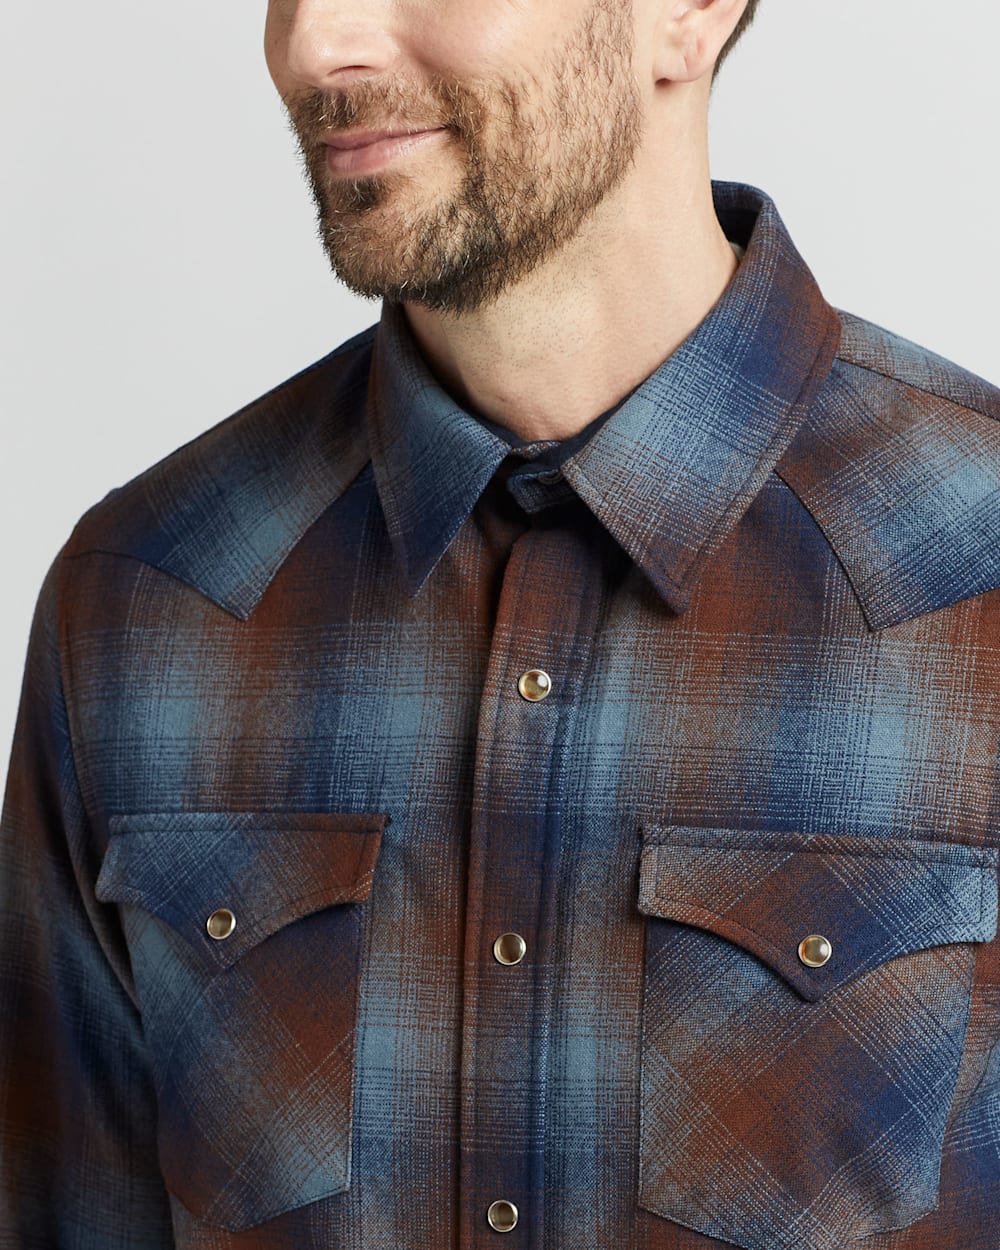 ALTERNATE VIEW OF MEN'S PLAID SNAP-FRONT WESTERN CANYON SHIRT IN BLUE/BROWN OMBRE image number 4